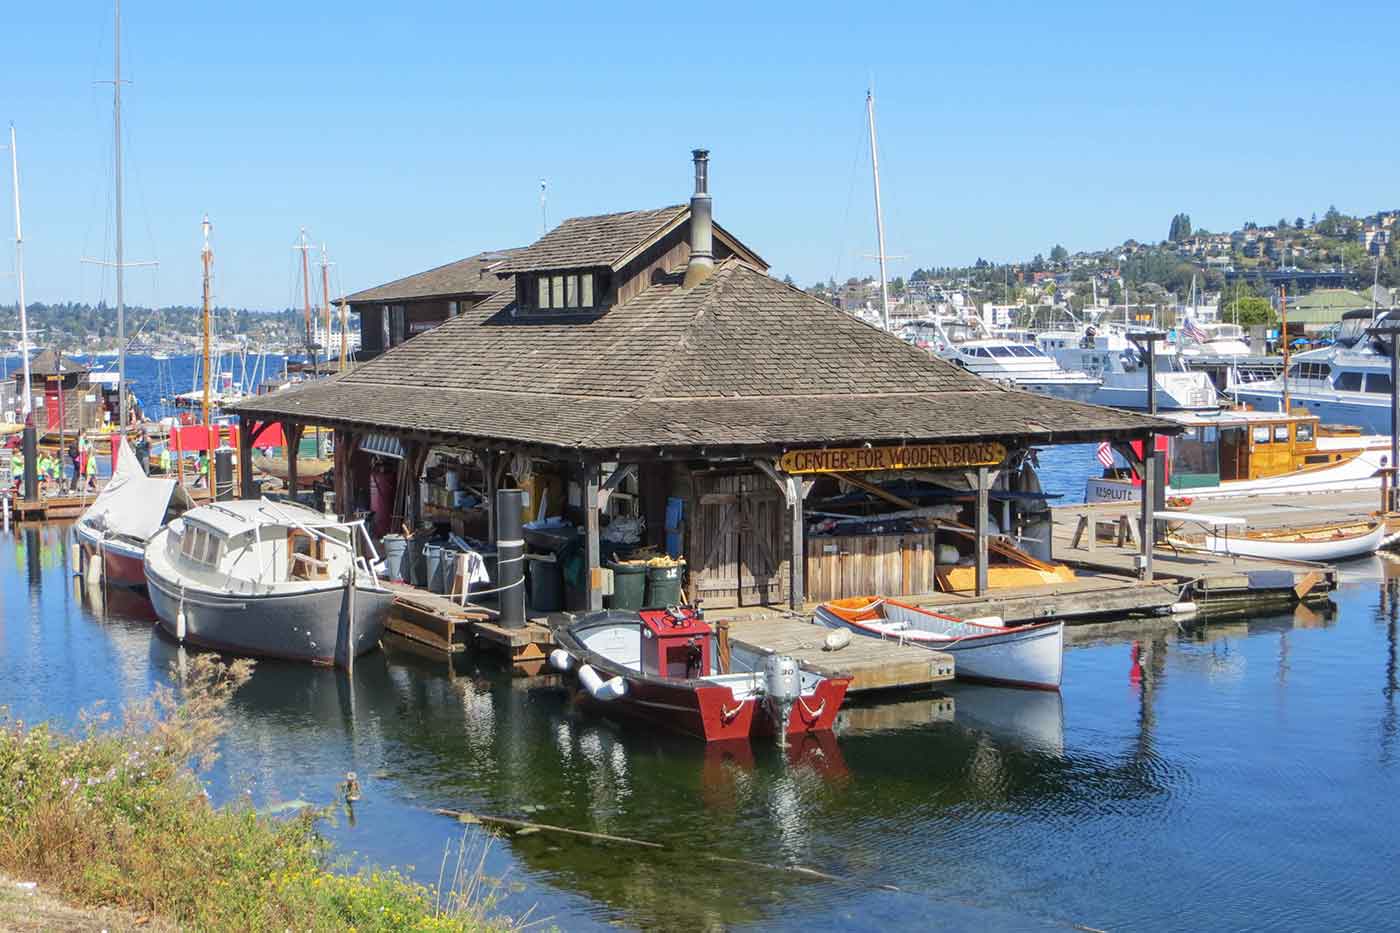 The Center for Wooden Boats